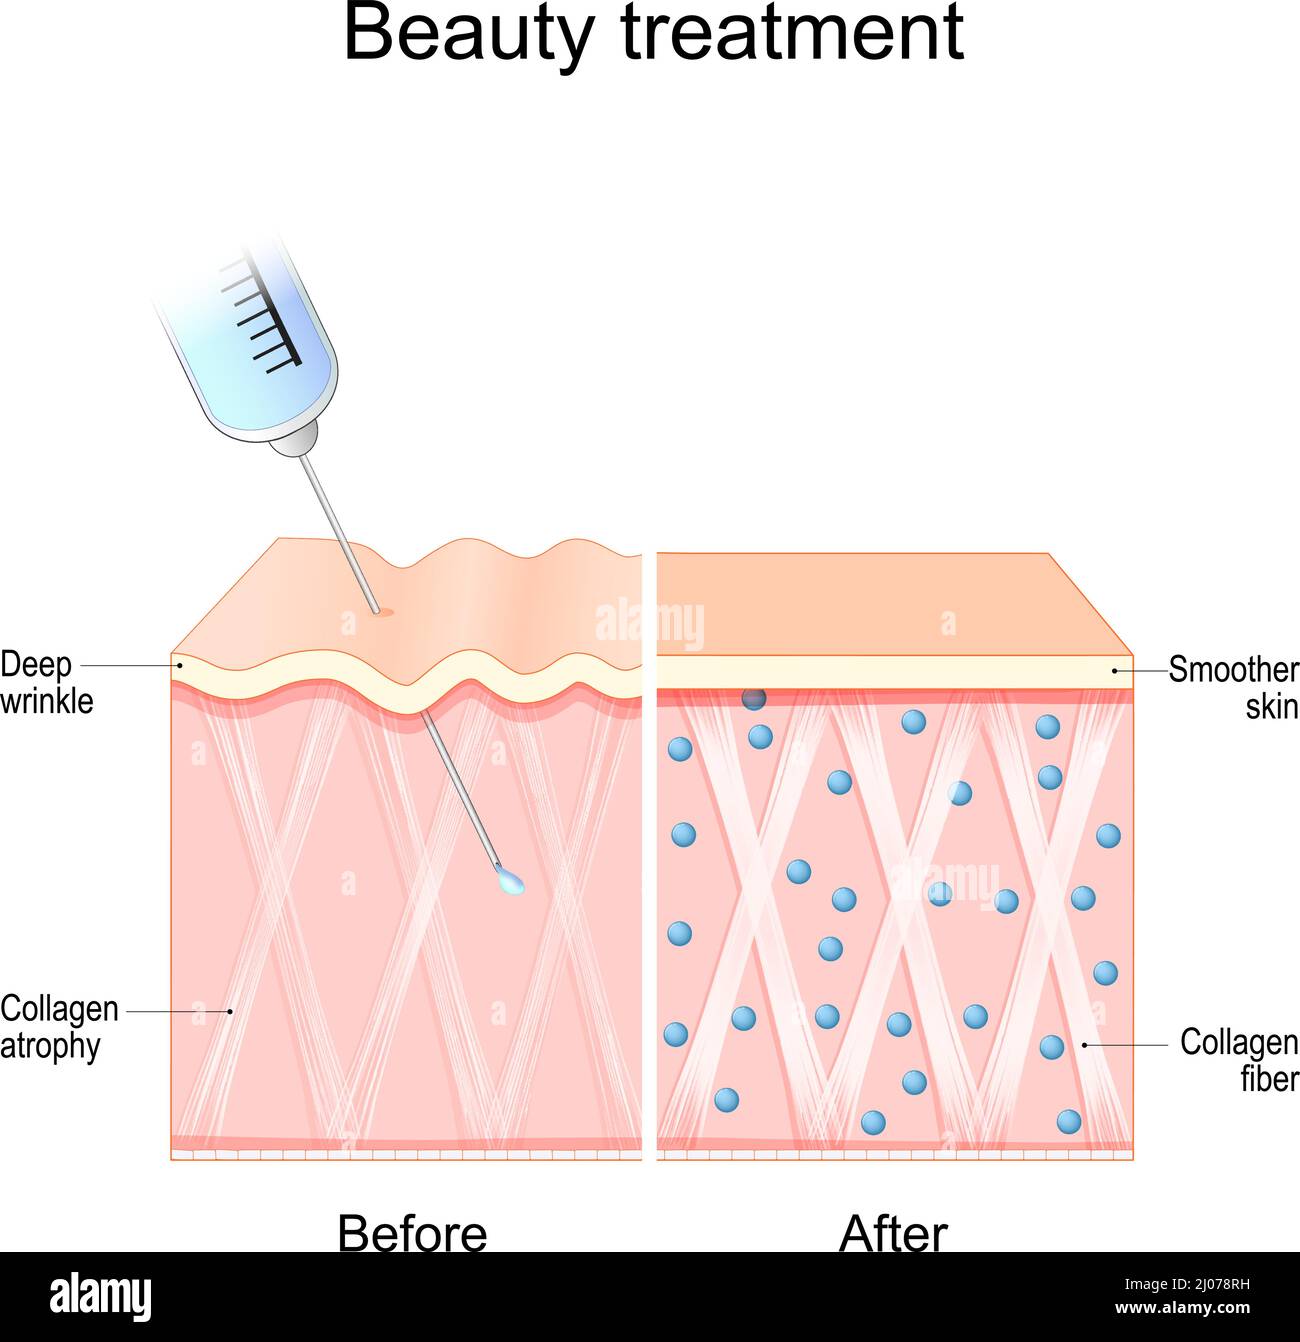 Beauty treatment. Human skin before and after procedure. Collagen atrophy and Deep wrinkle. Smoother skin after injection. Vector illustration Stock Vector